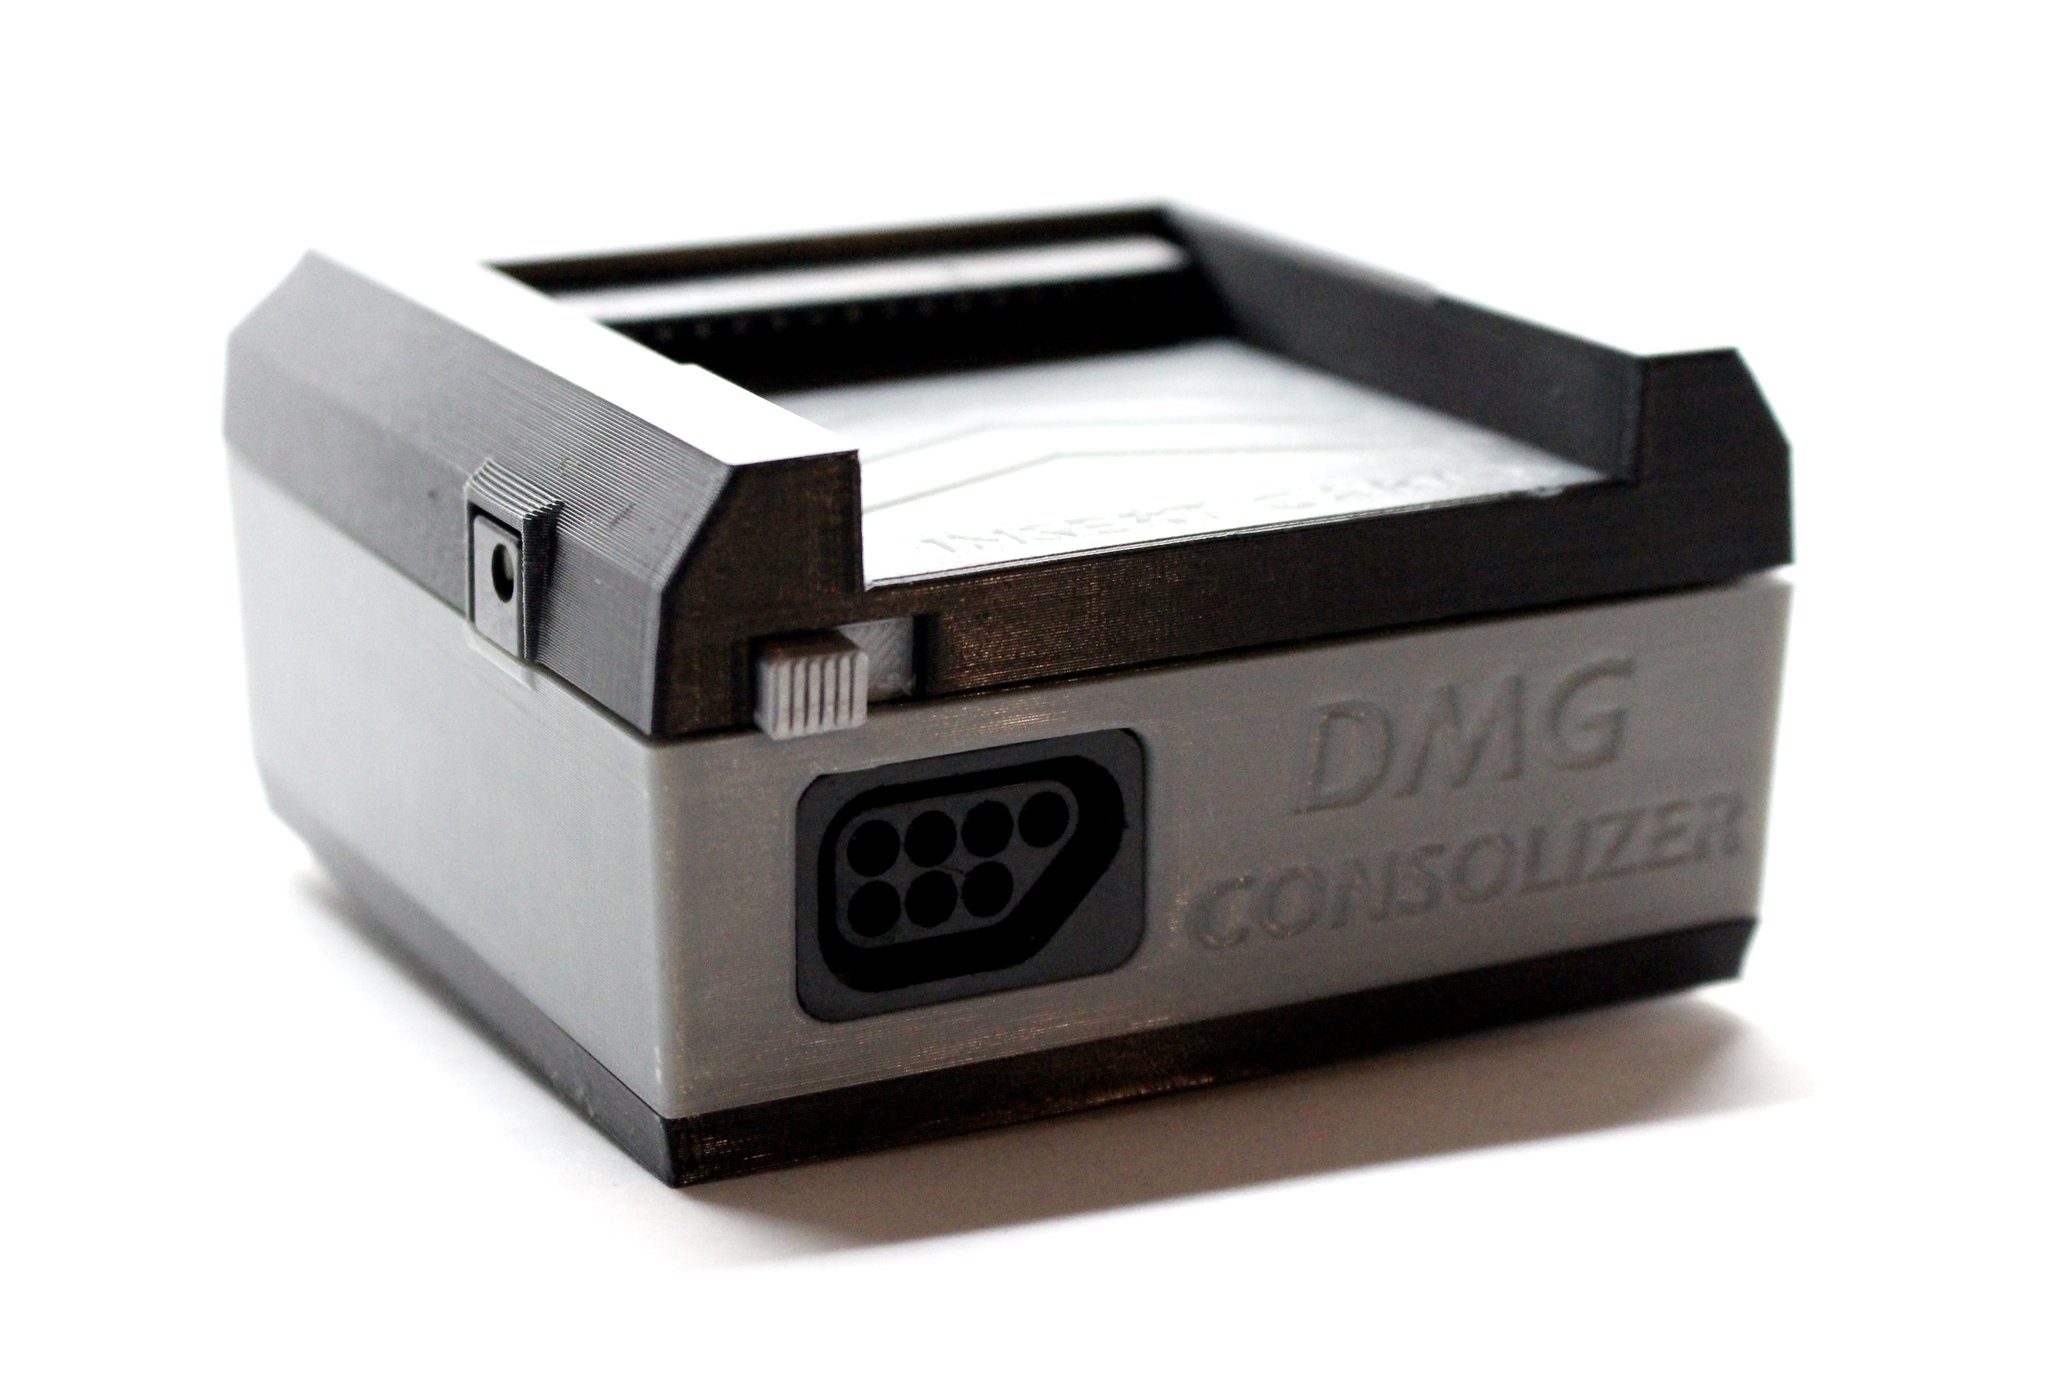 DMG Consolizer by Gamebox Systems